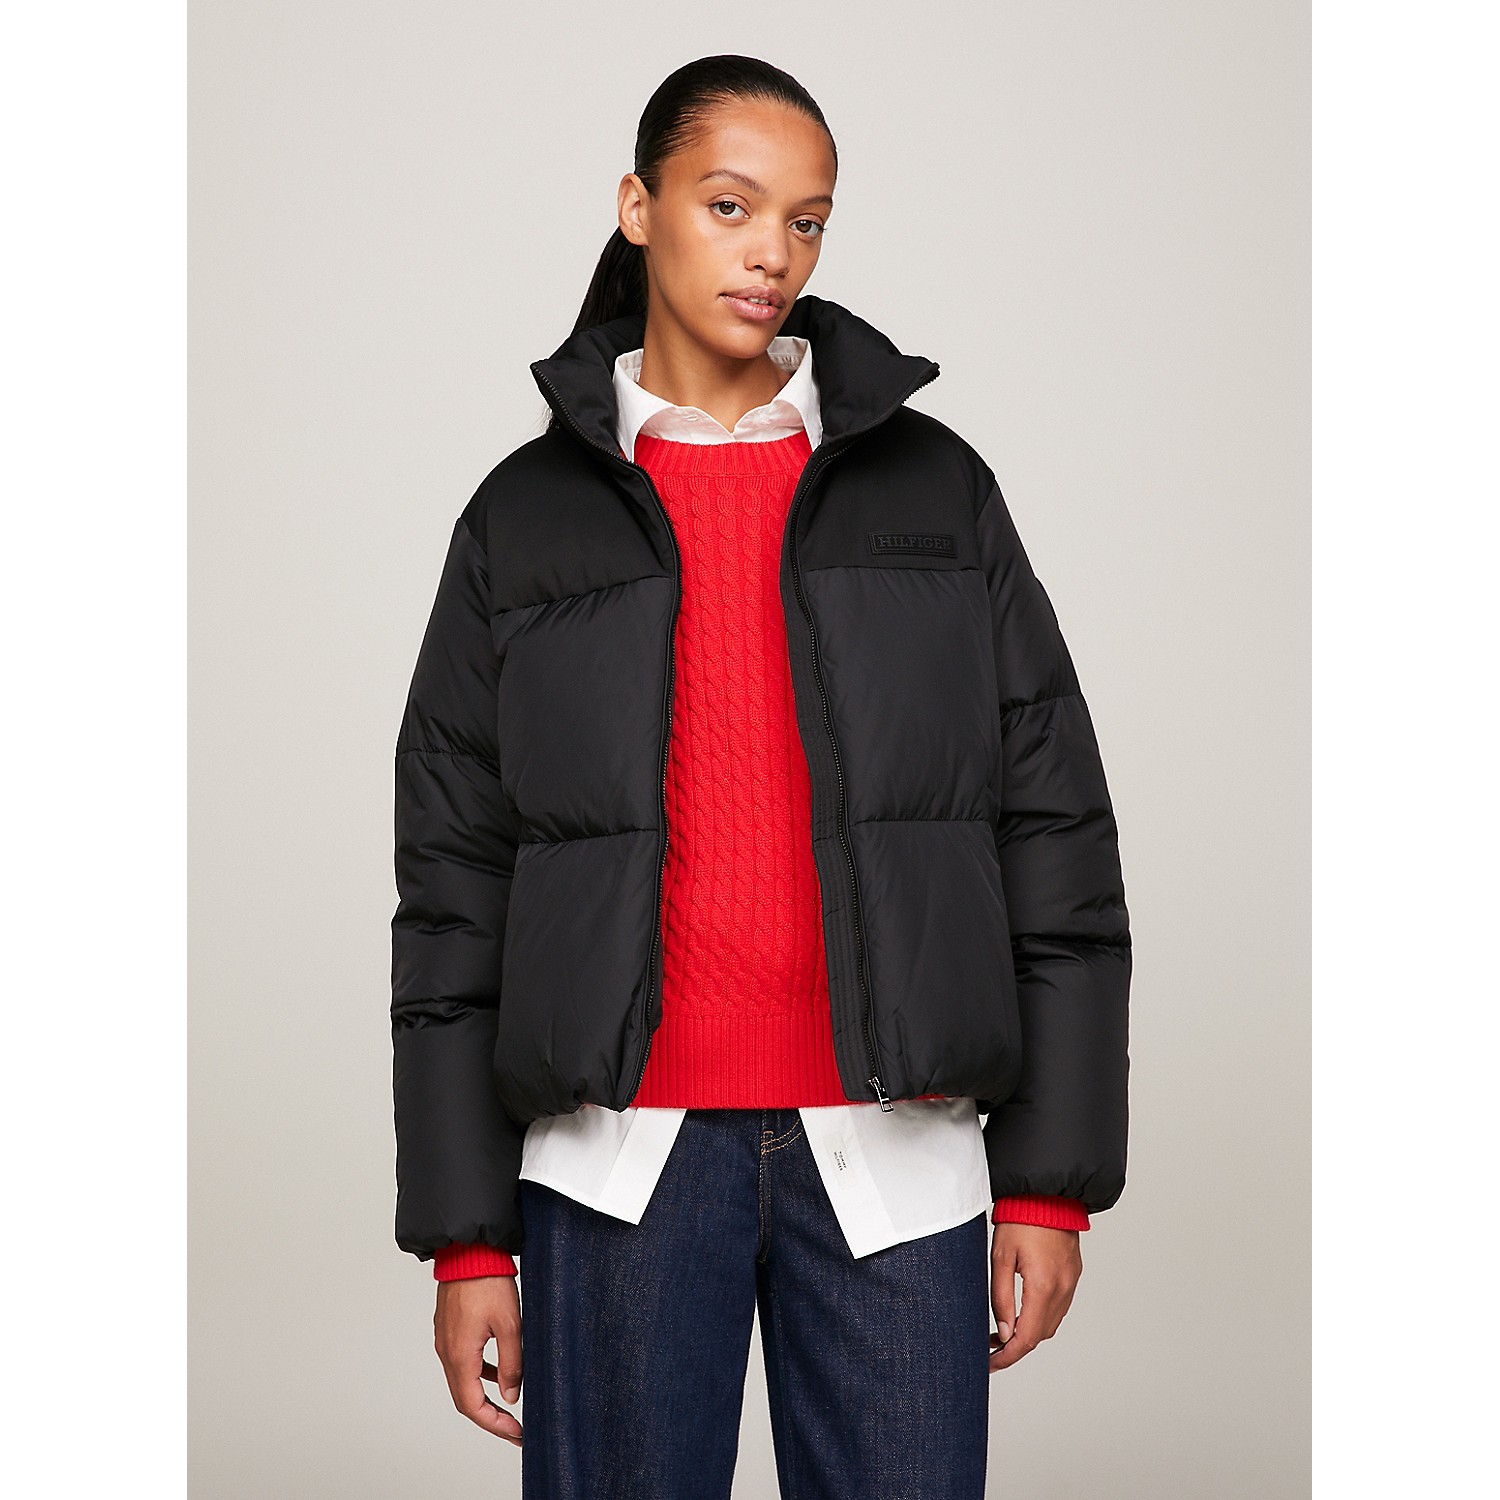 TOMMY HILFIGER New York THProtect Puffer Jacket